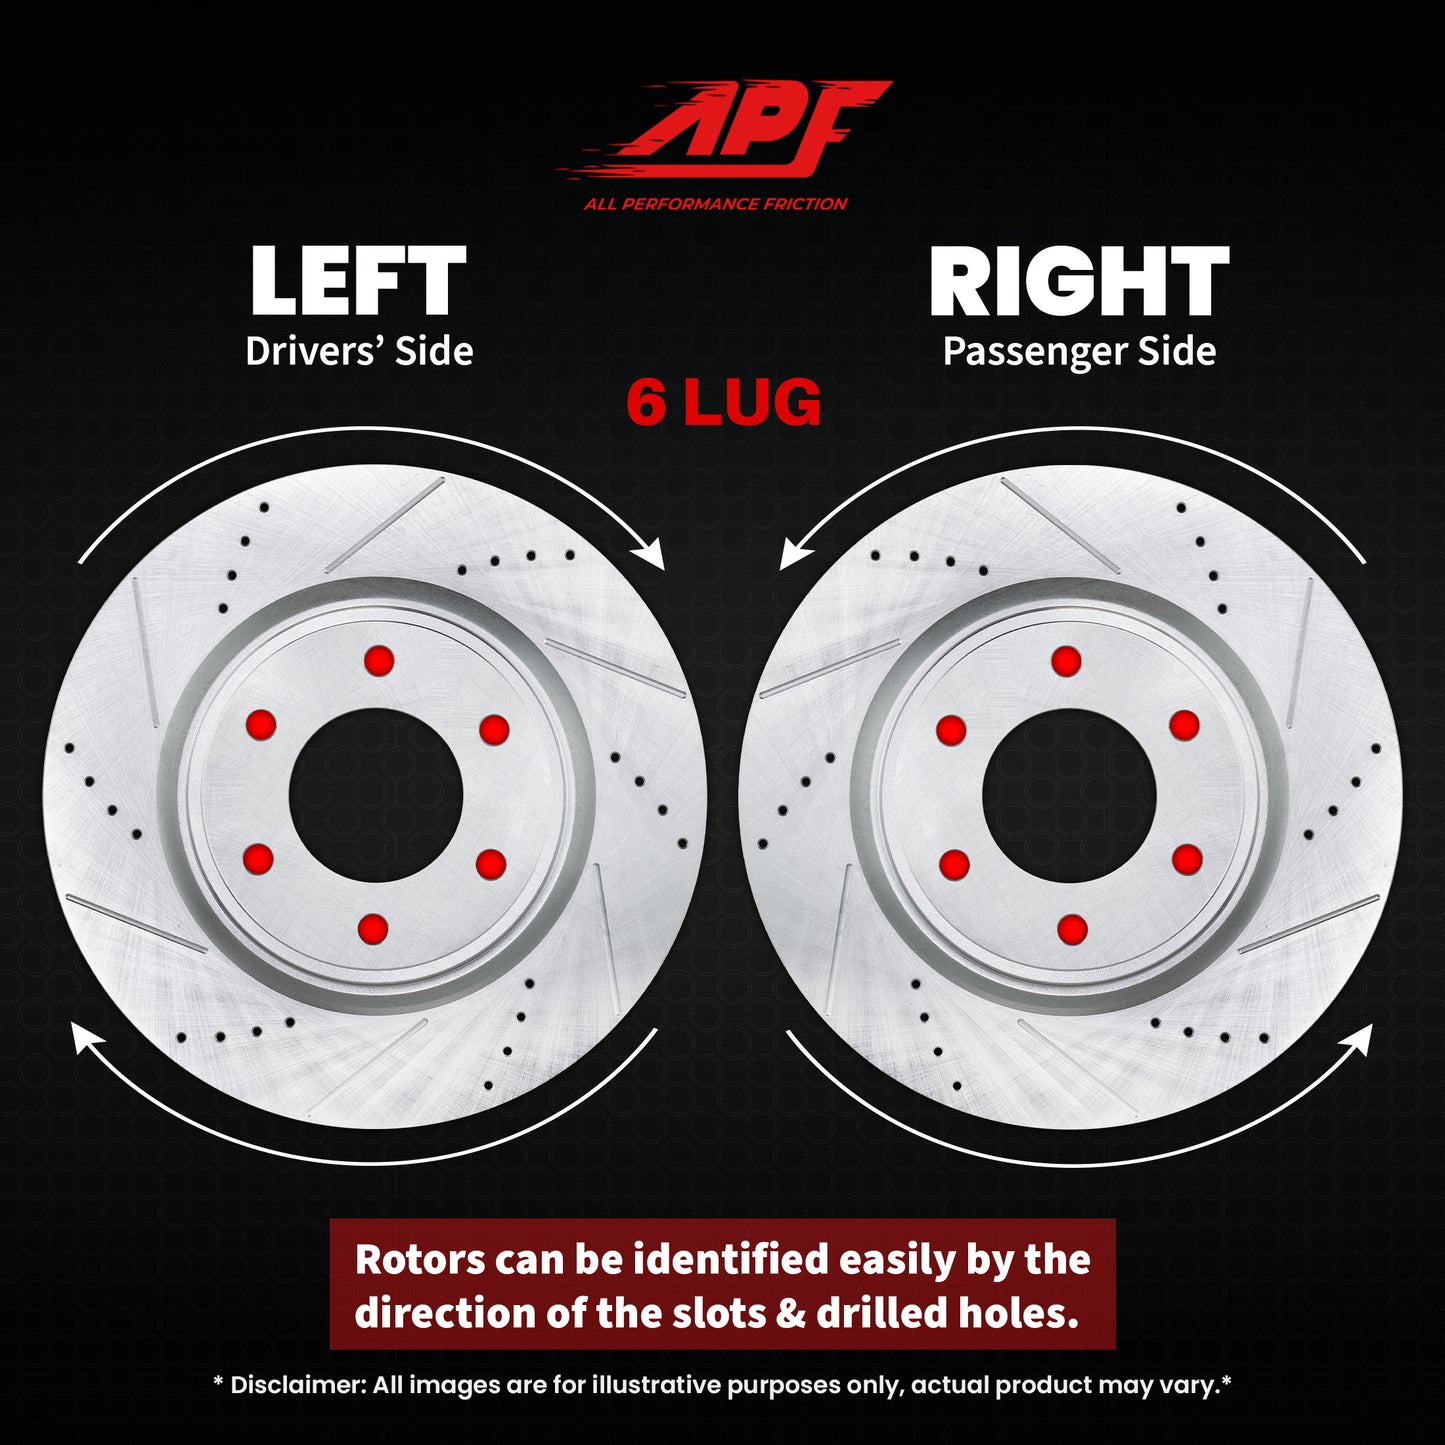 APF All Performance Friction Front and Rear Rotors and Pads Full Kit compatible with GMC Yukon XL 1500 2000-2002 Zinc Drilled Slotted Rotors with Ceramic Carbon Fiber Brake Pads | $335.06